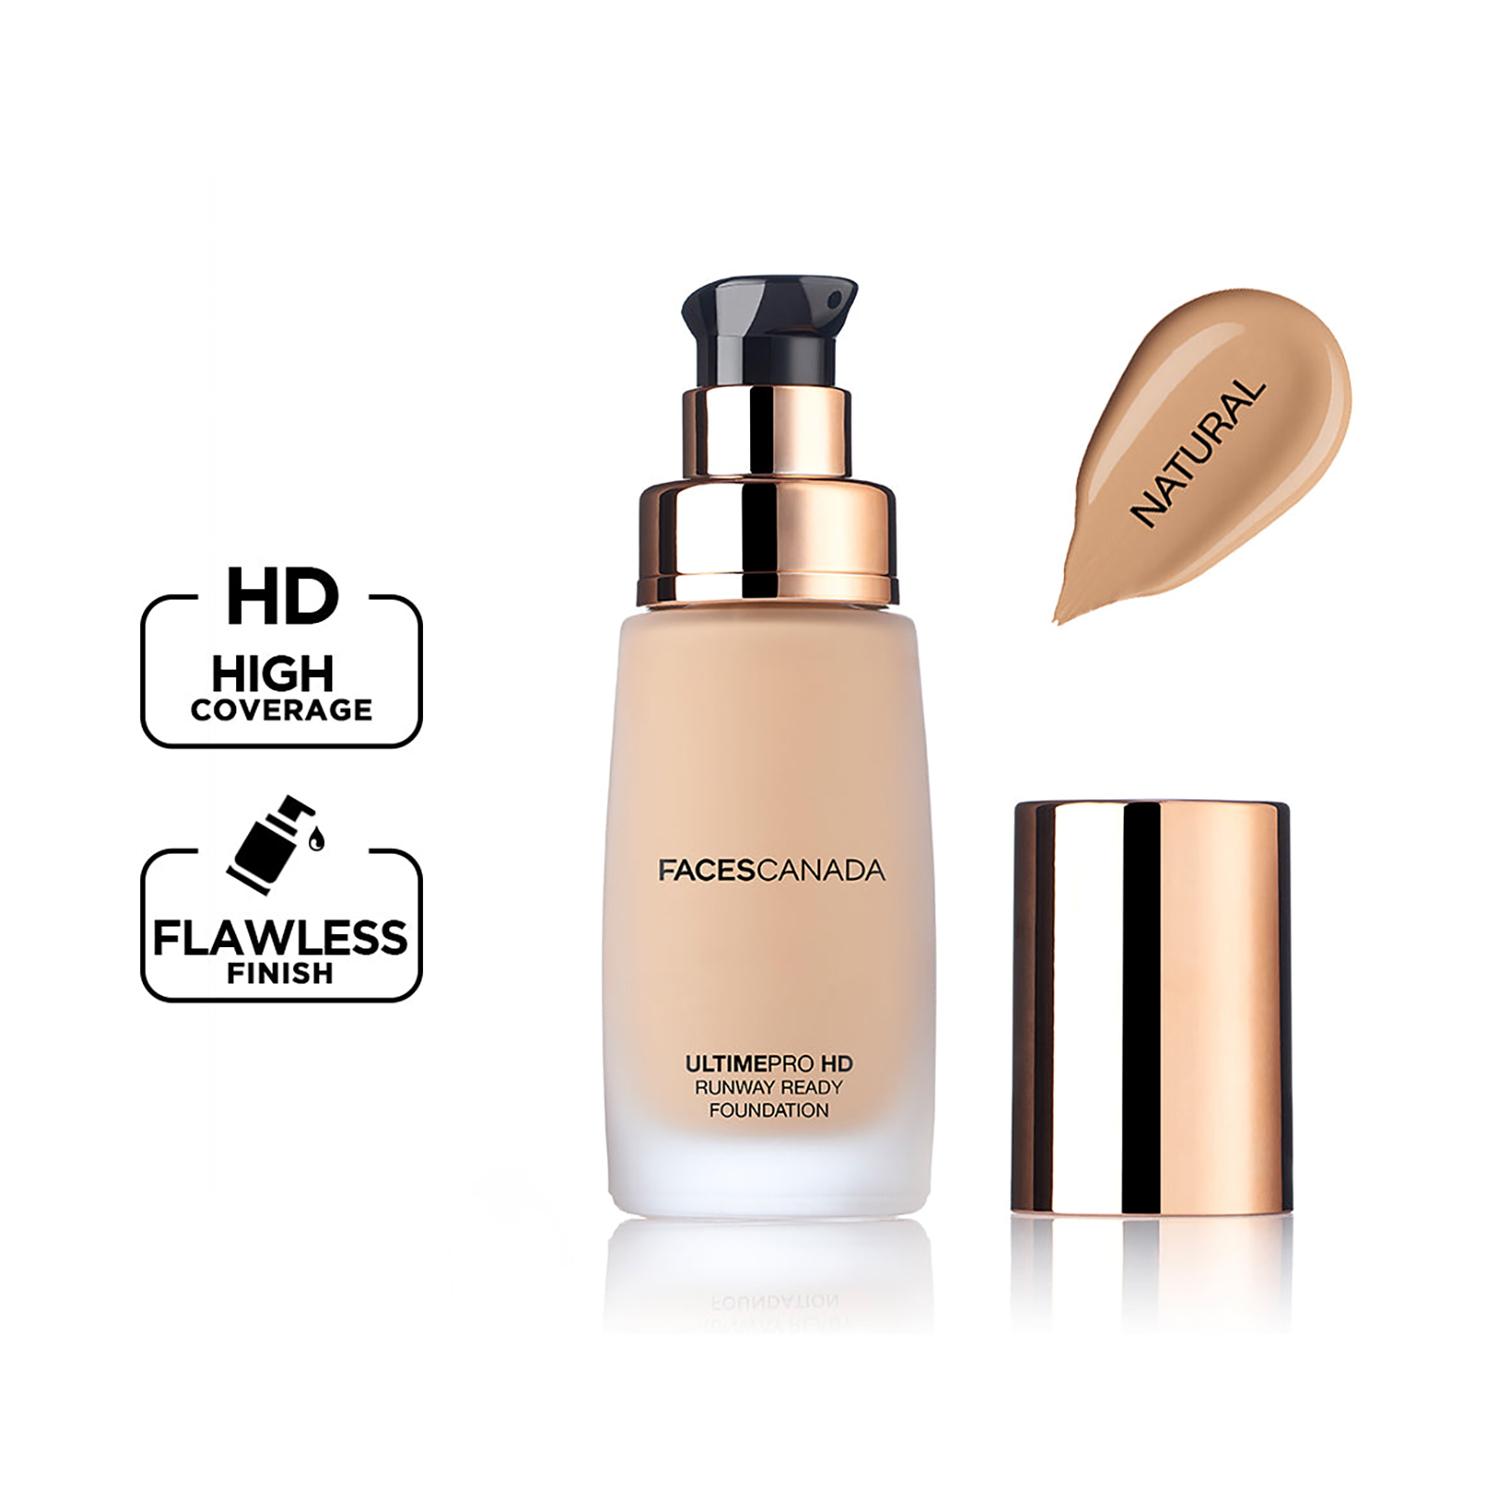 Faces Canada | Faces Canada Ultime Pro HD Runway Ready Foundation - Natural, Radiant Flawless Finish (30 ml)